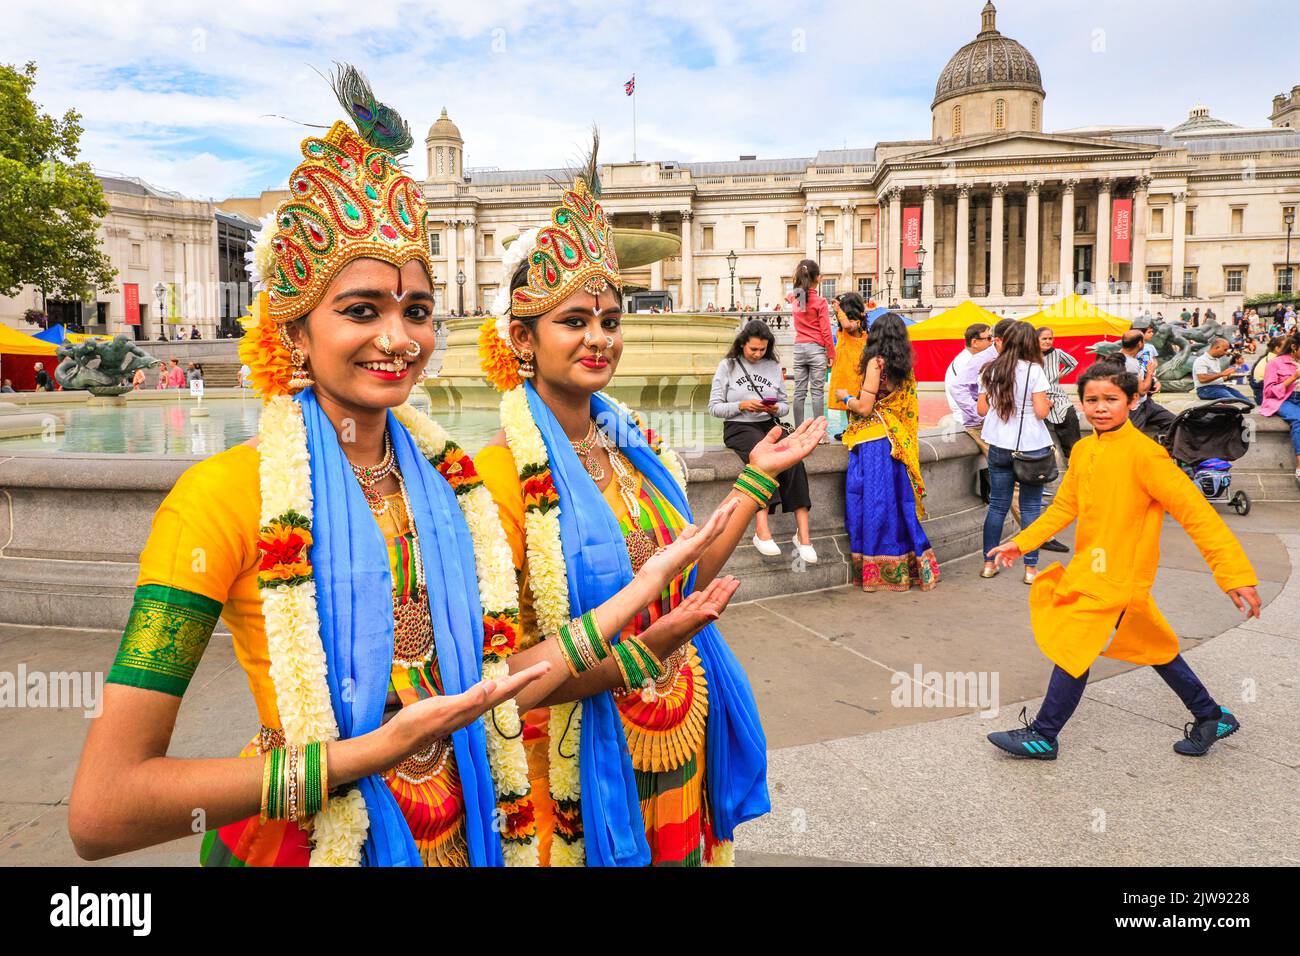 London, UK. 04th Aug, 2022. Young girls from an Odissi dance group, an ancient Indian classical dance, are excited to take part in the festivities. The Hindu Ratha Yatra Festival (alternative spelling Rathayatra), or Chariot Festival, falls on the 4th of September this year and is celebrated in London with a procession of the chariots and deities from Hyde Park to Trafalgar Square, accompanied by the public, followed festivities, free food and performances in Trafalgar Square. Credit: Imageplotter/Alamy Live News Stock Photo